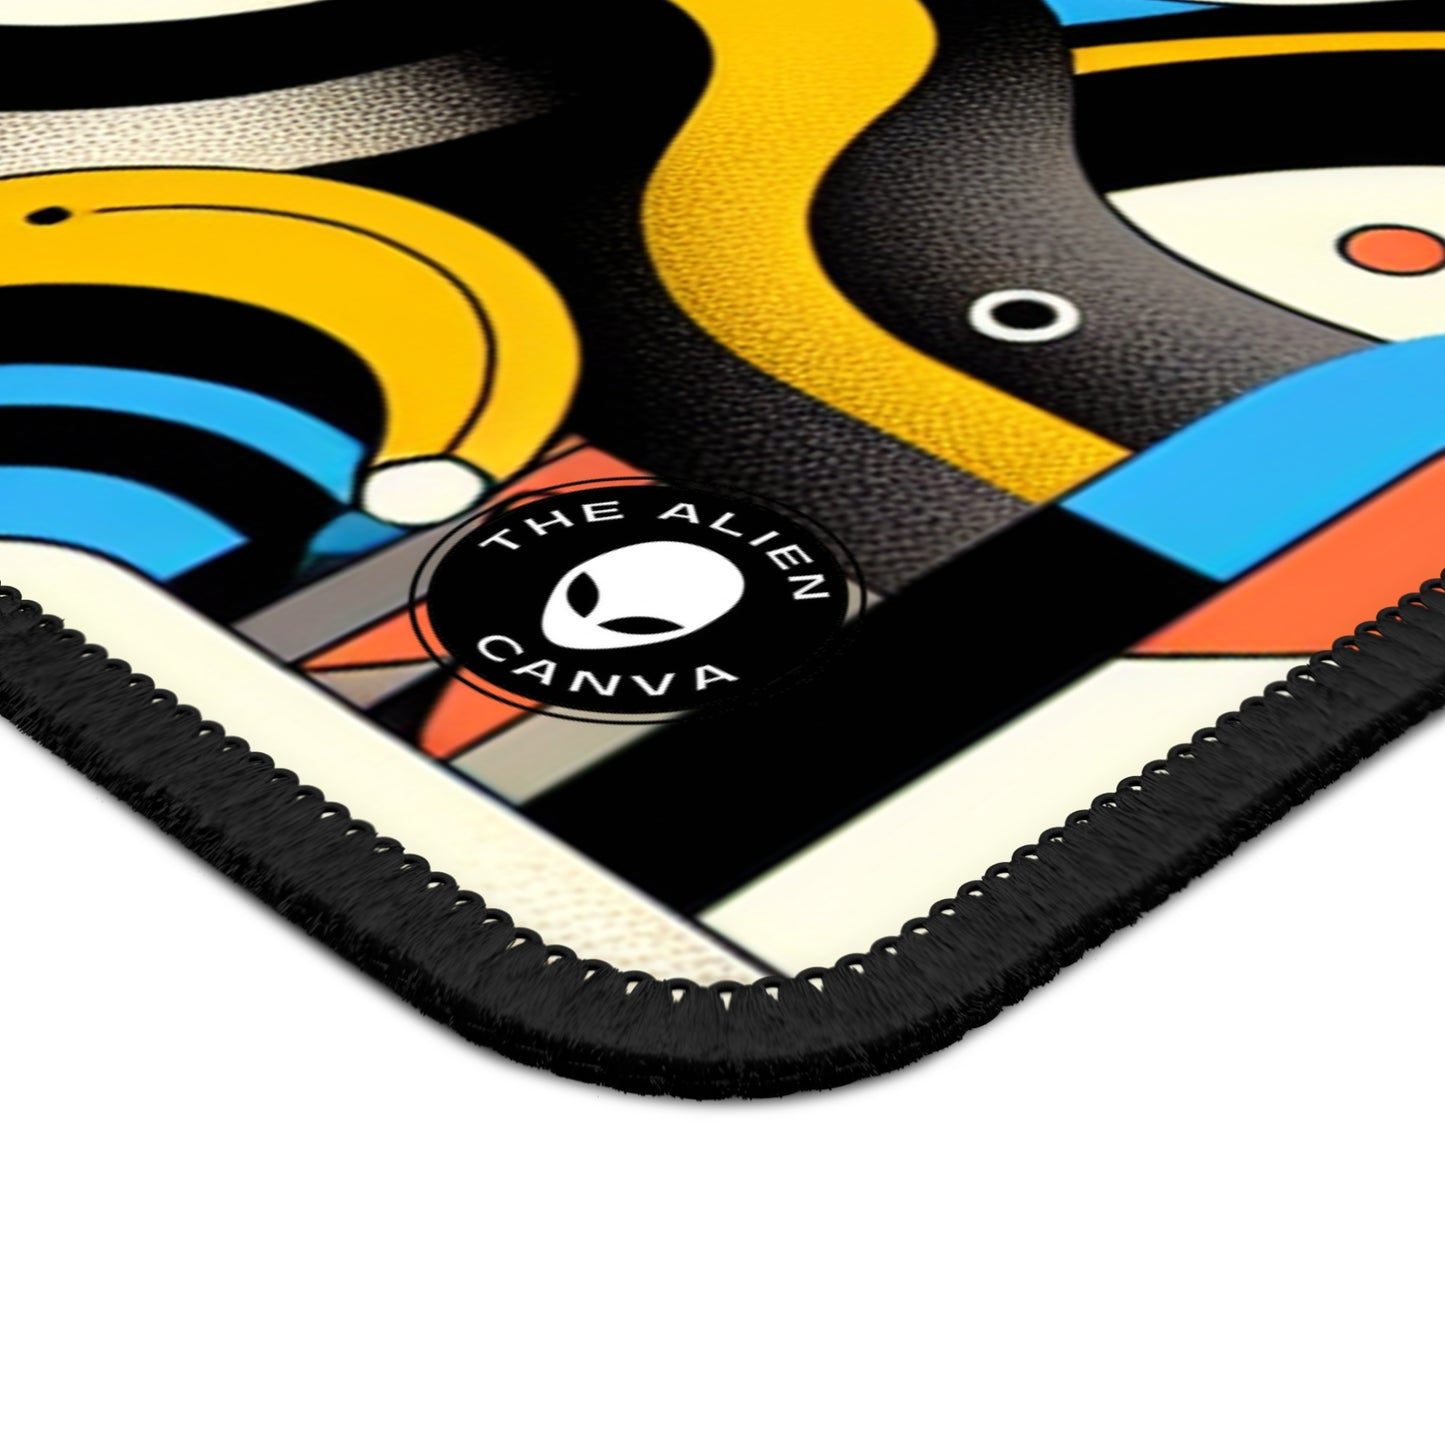 "Dada Fusion: A Whimsical Chaos of Everyday Objects" - The Alien Gaming Mouse Pad Neo-Dada